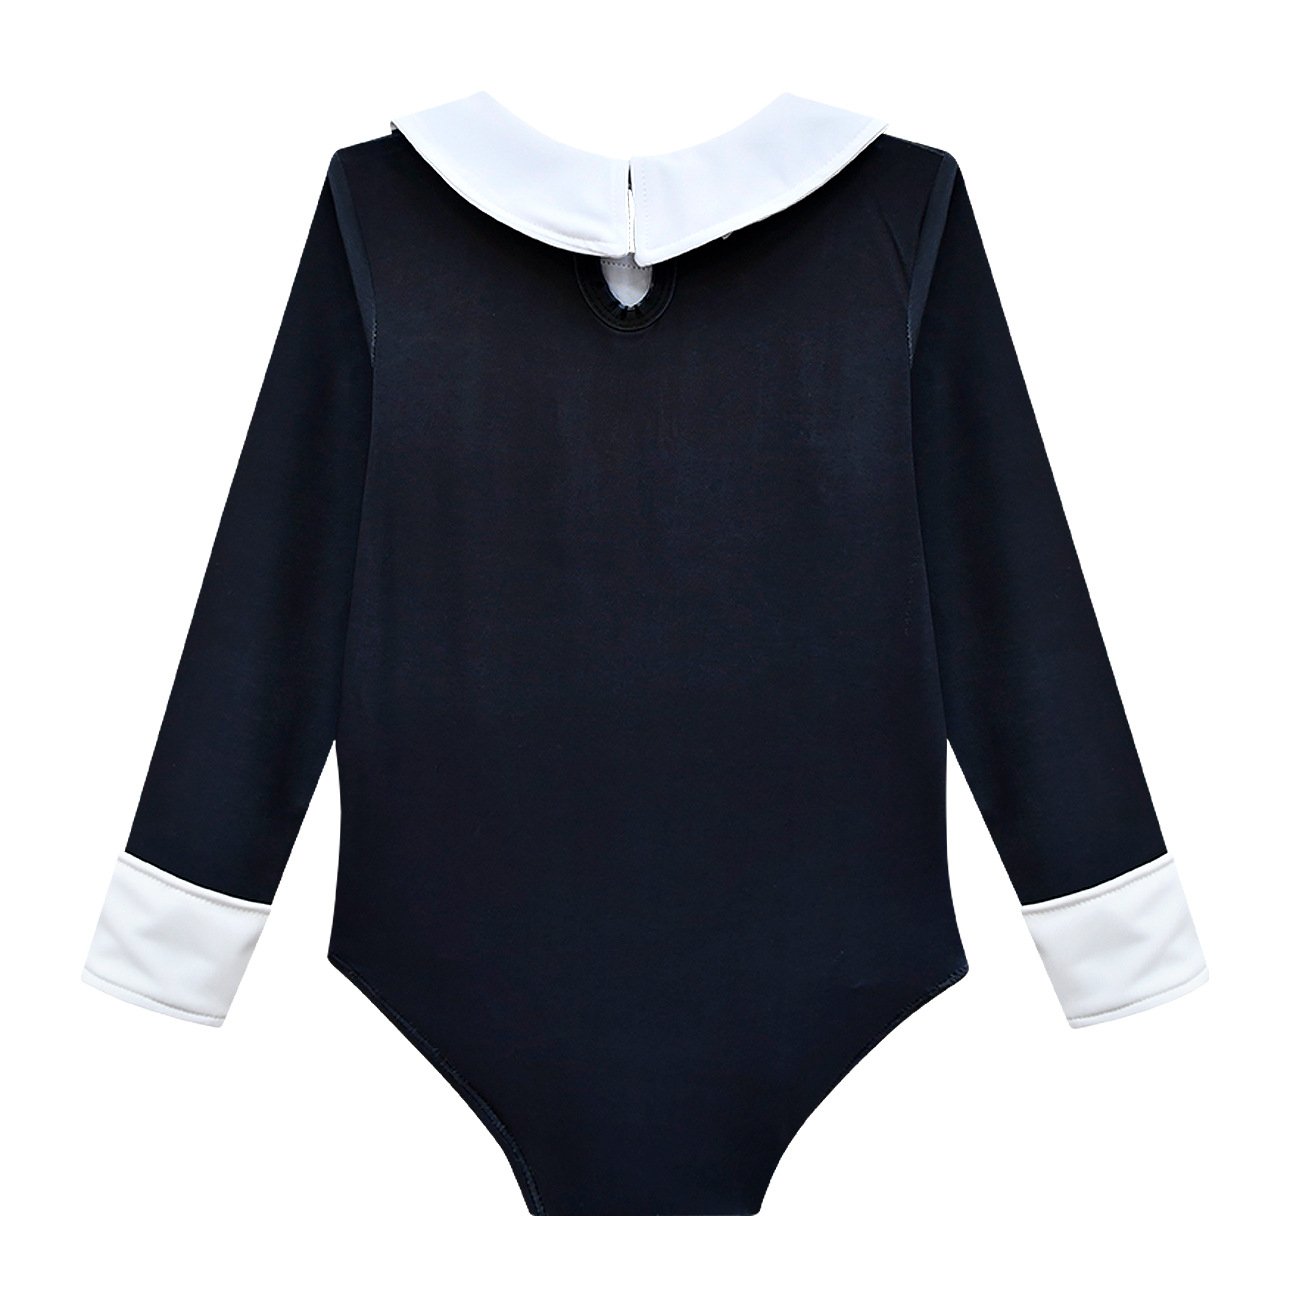 Wednesday Costume The Addams Family Cosplay Lapel One Piece Swimsuit For Kids